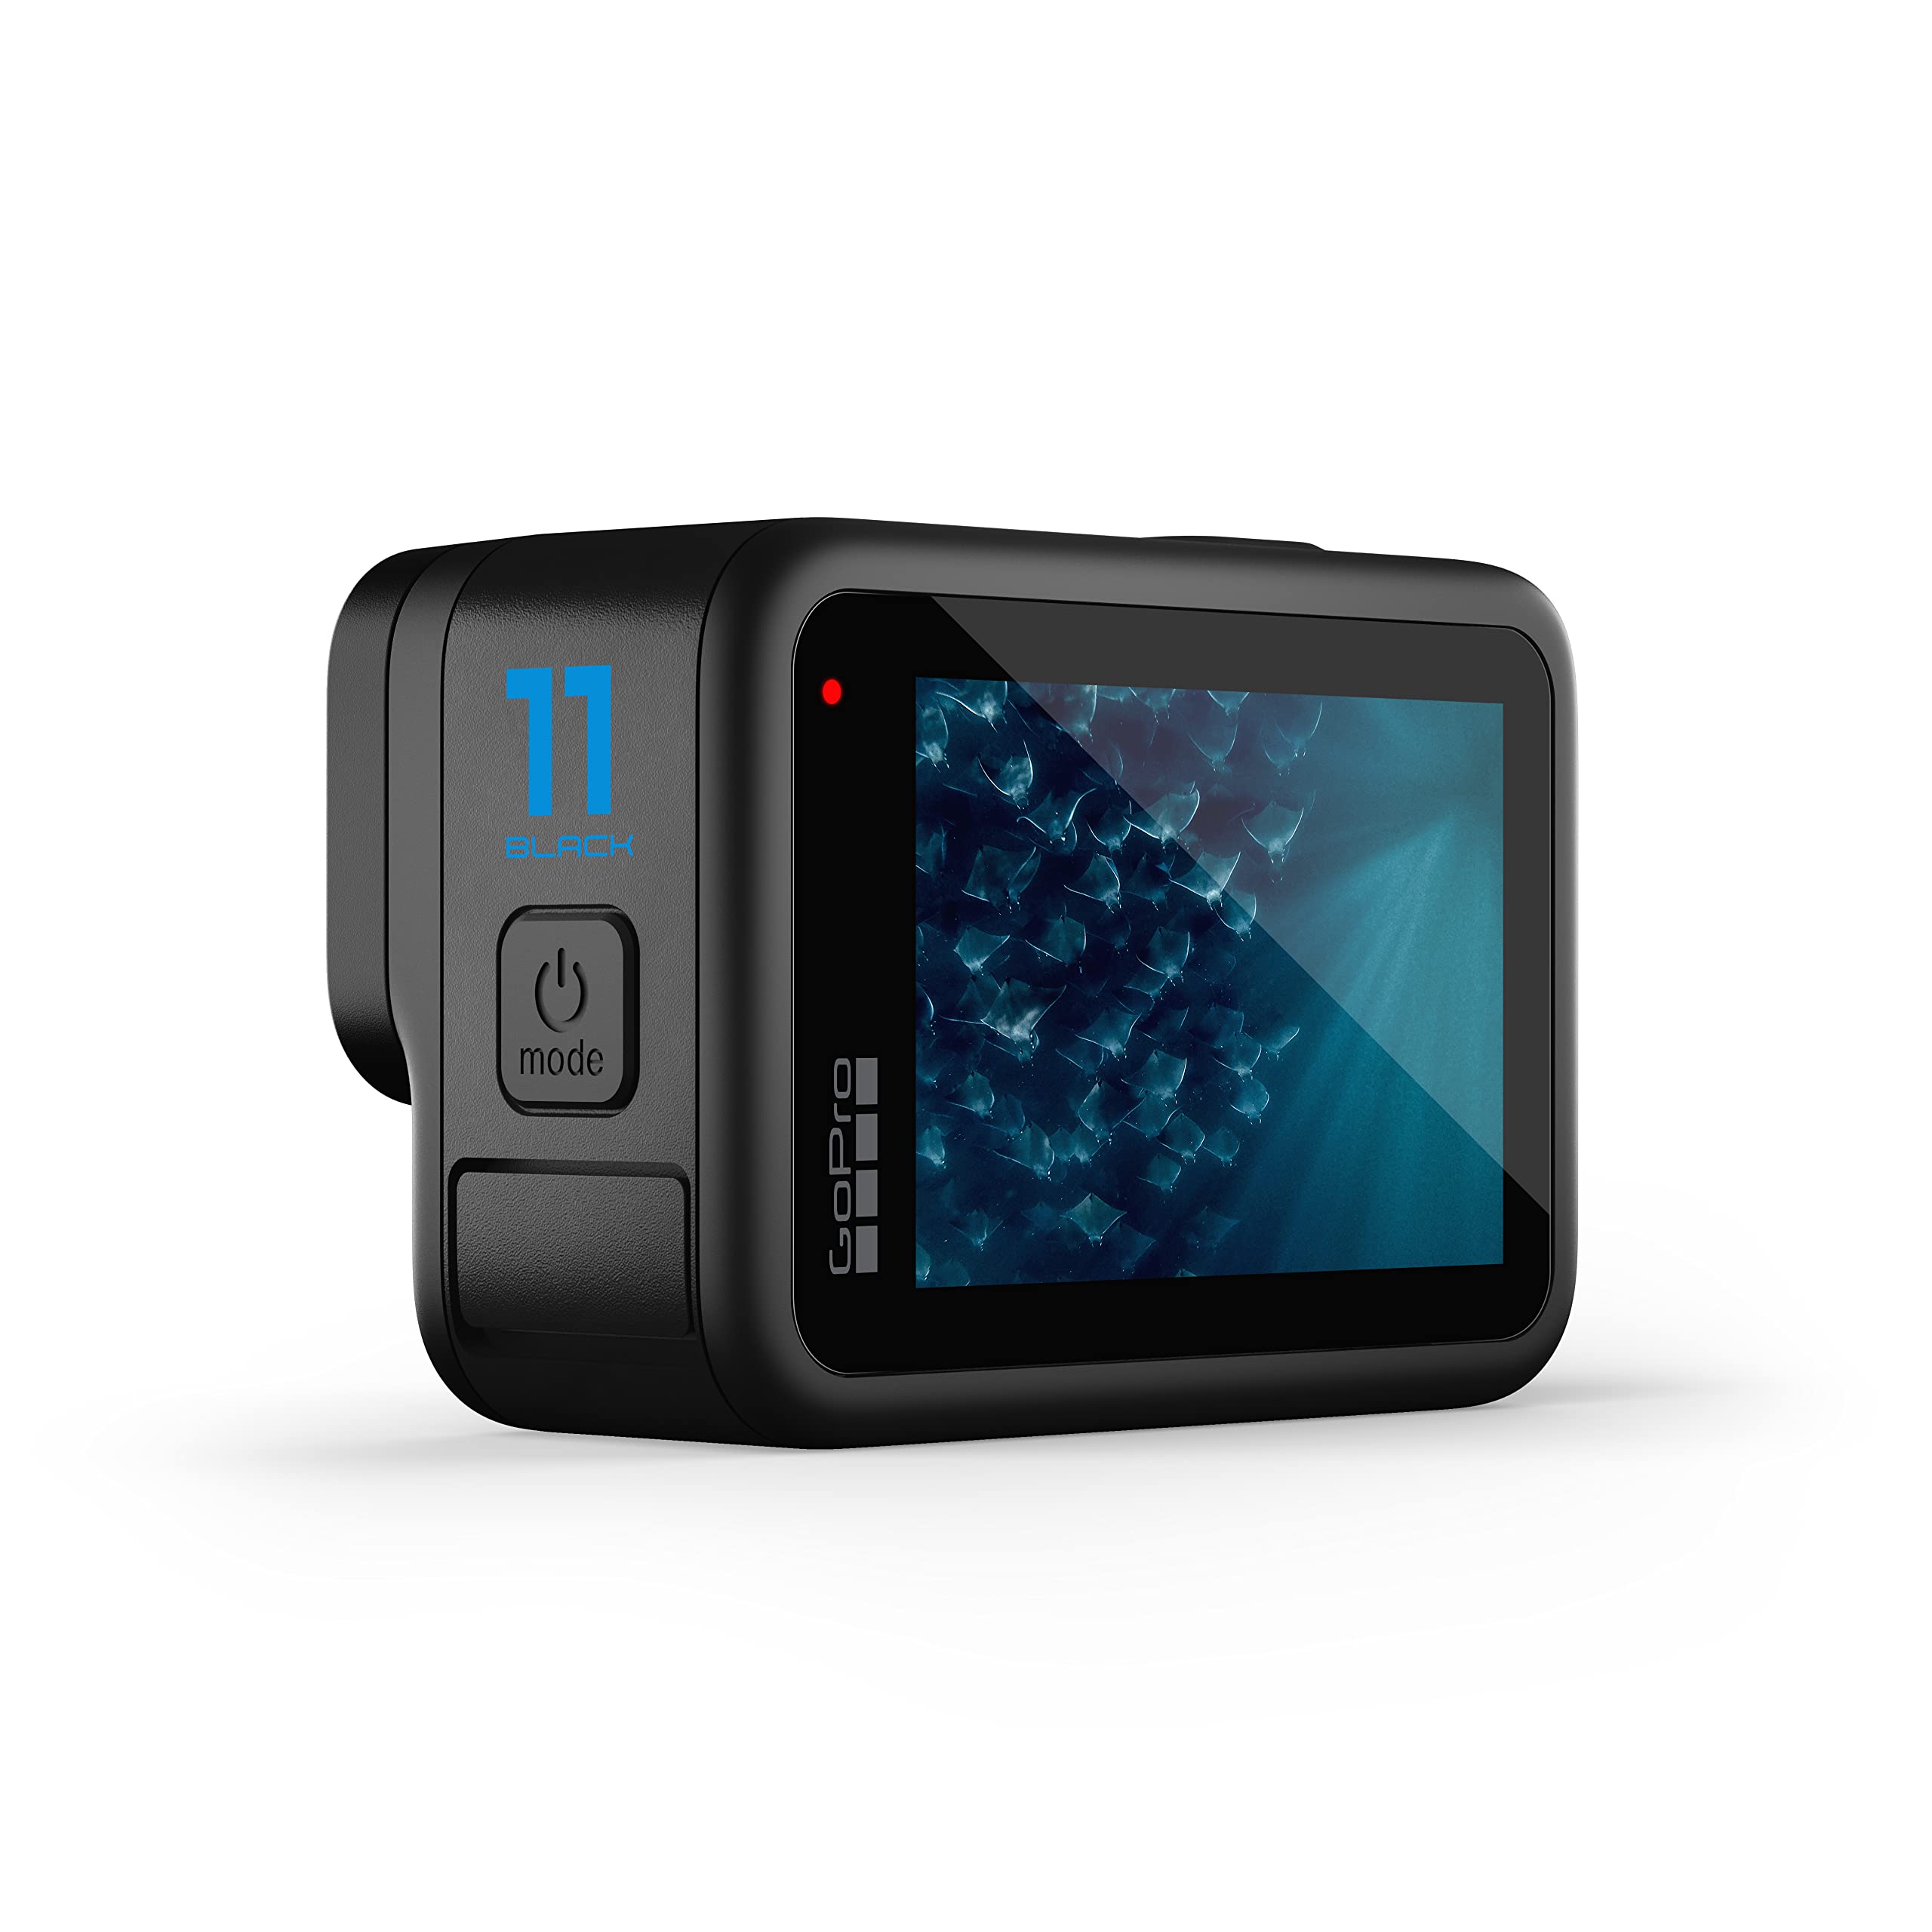 GoPro HERO11 Black - Waterproof Action Camera with 5.3K60 Ultra HD Video, 27MP Photos, 1/1.9